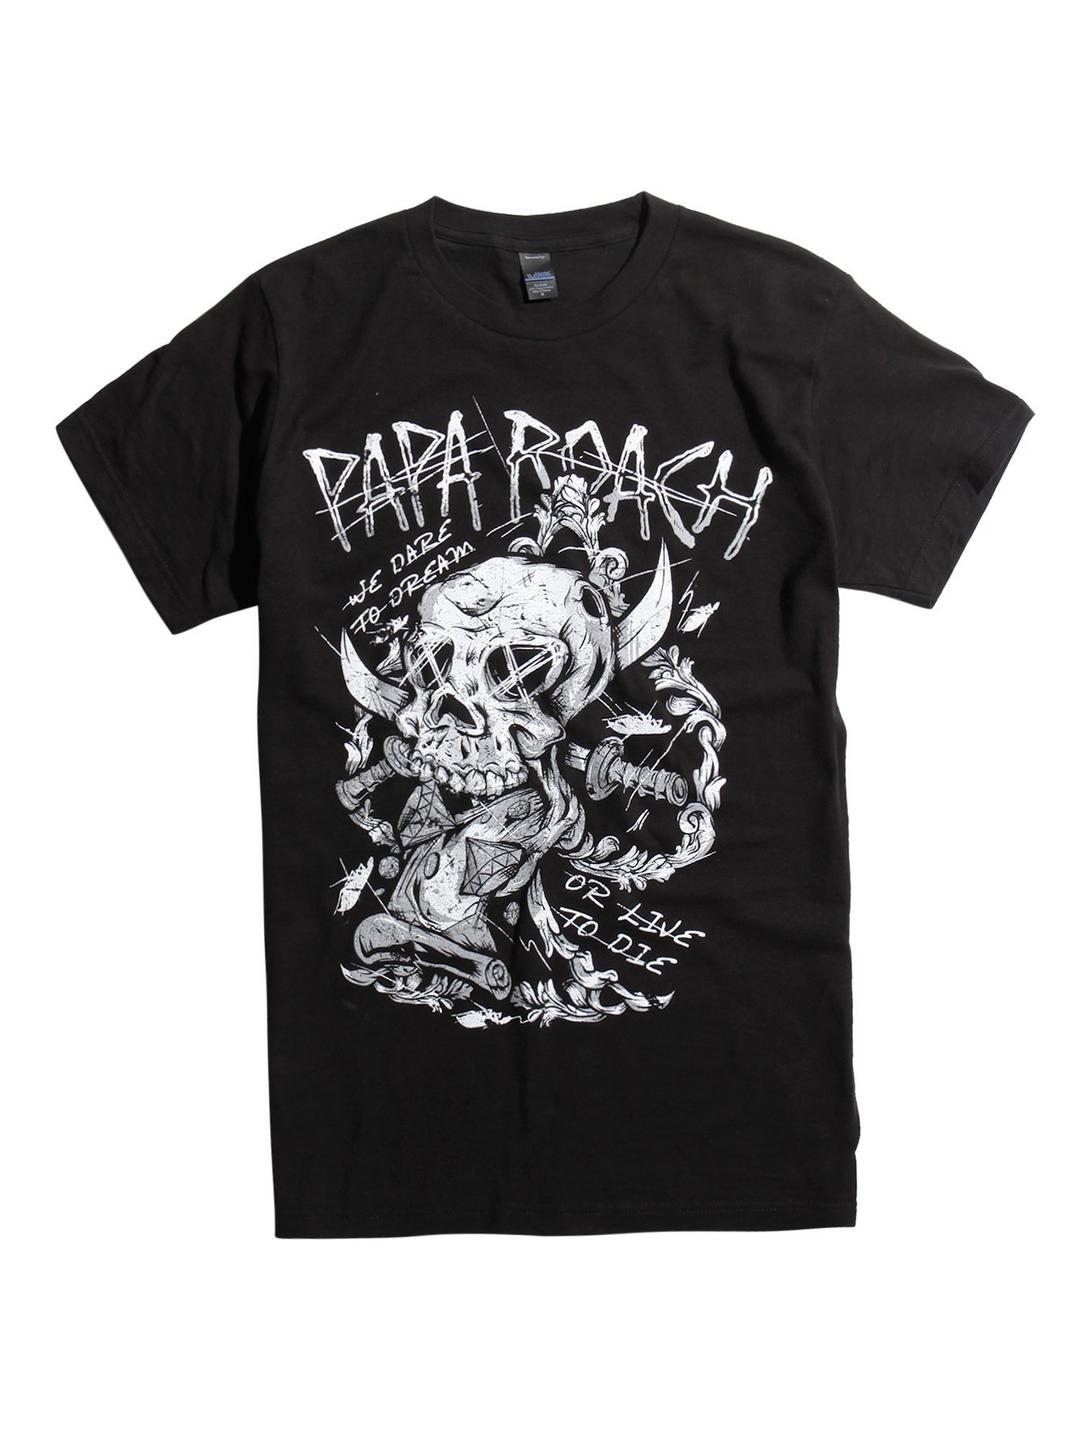 Papa Roach We Dare To Dream Or Live To Die T-Shirt, BLACK, hi-res